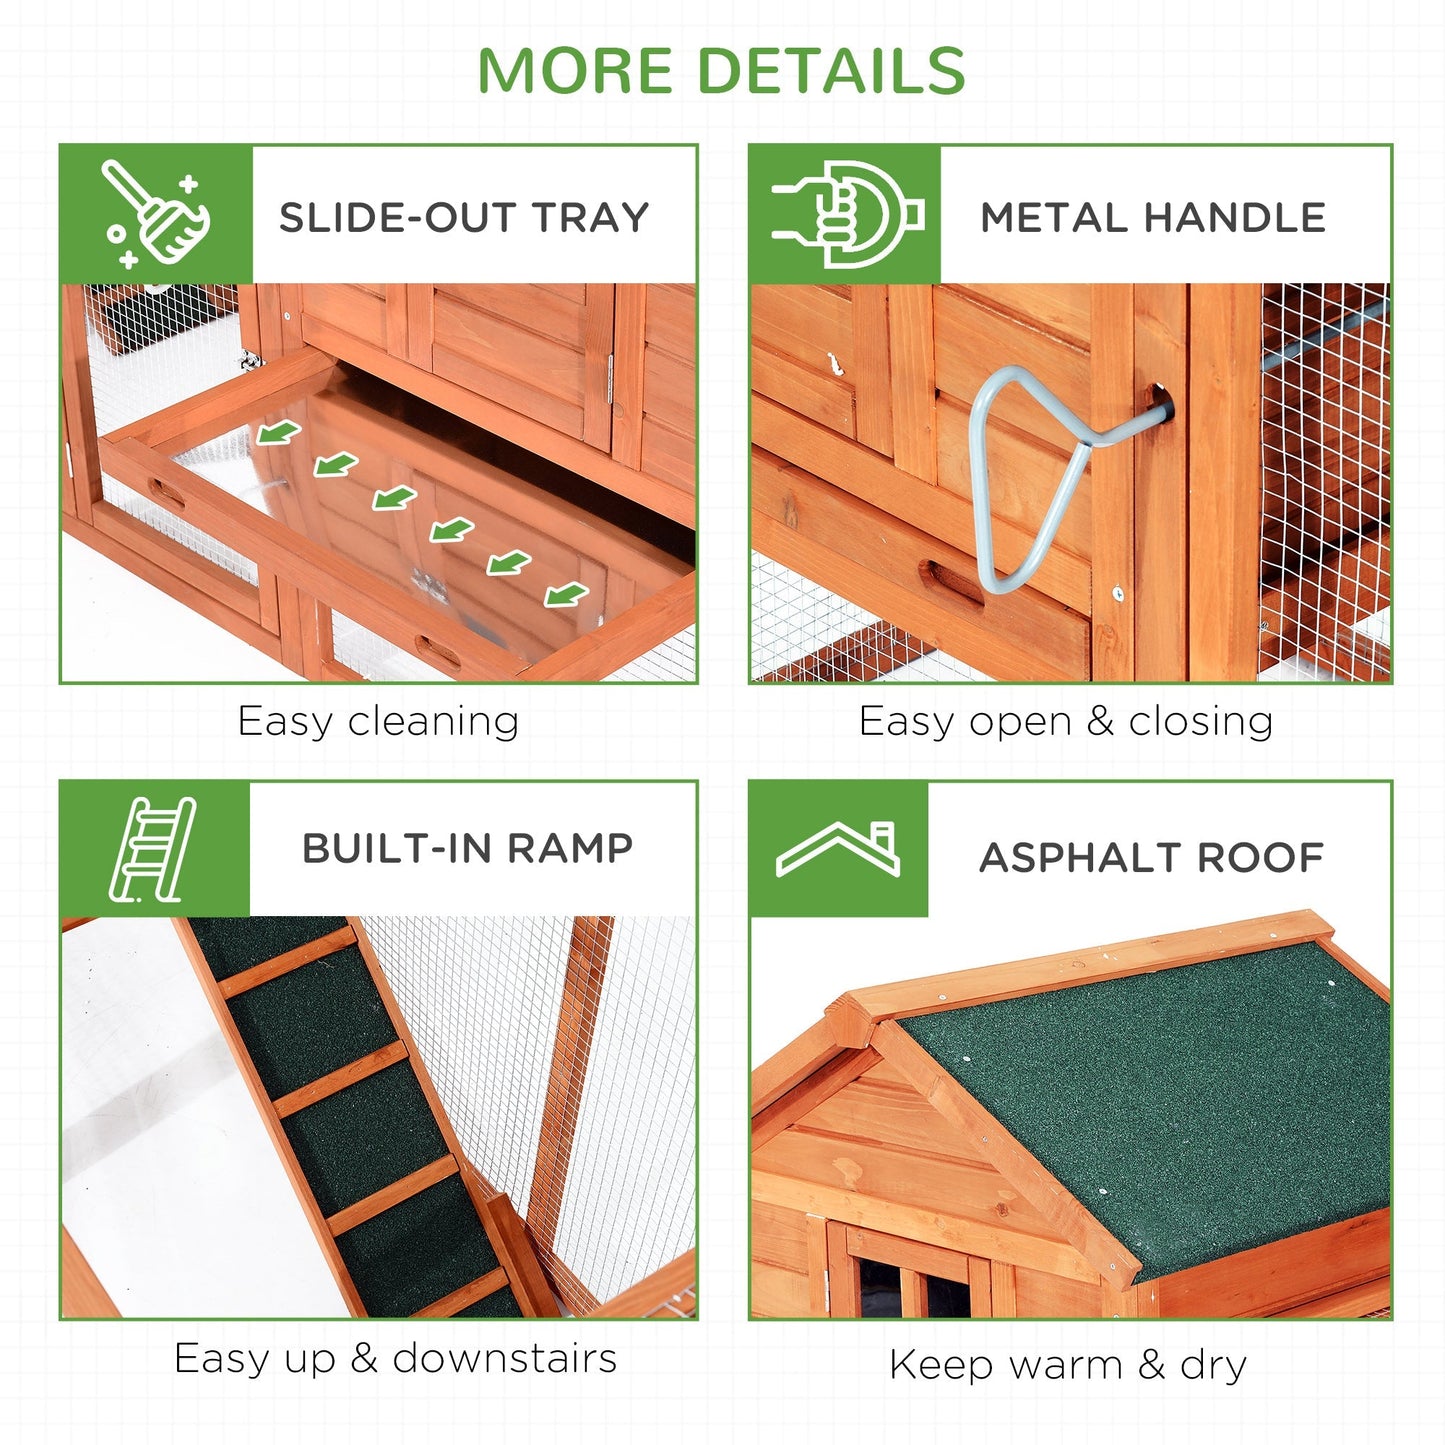 123" Dual Chicken Coop Wooden Large Chicken House Rabbit Hutch Hen Poultry Cage Backyard with Outdoor Ramps and Nesting Boxes at Gallery Canada